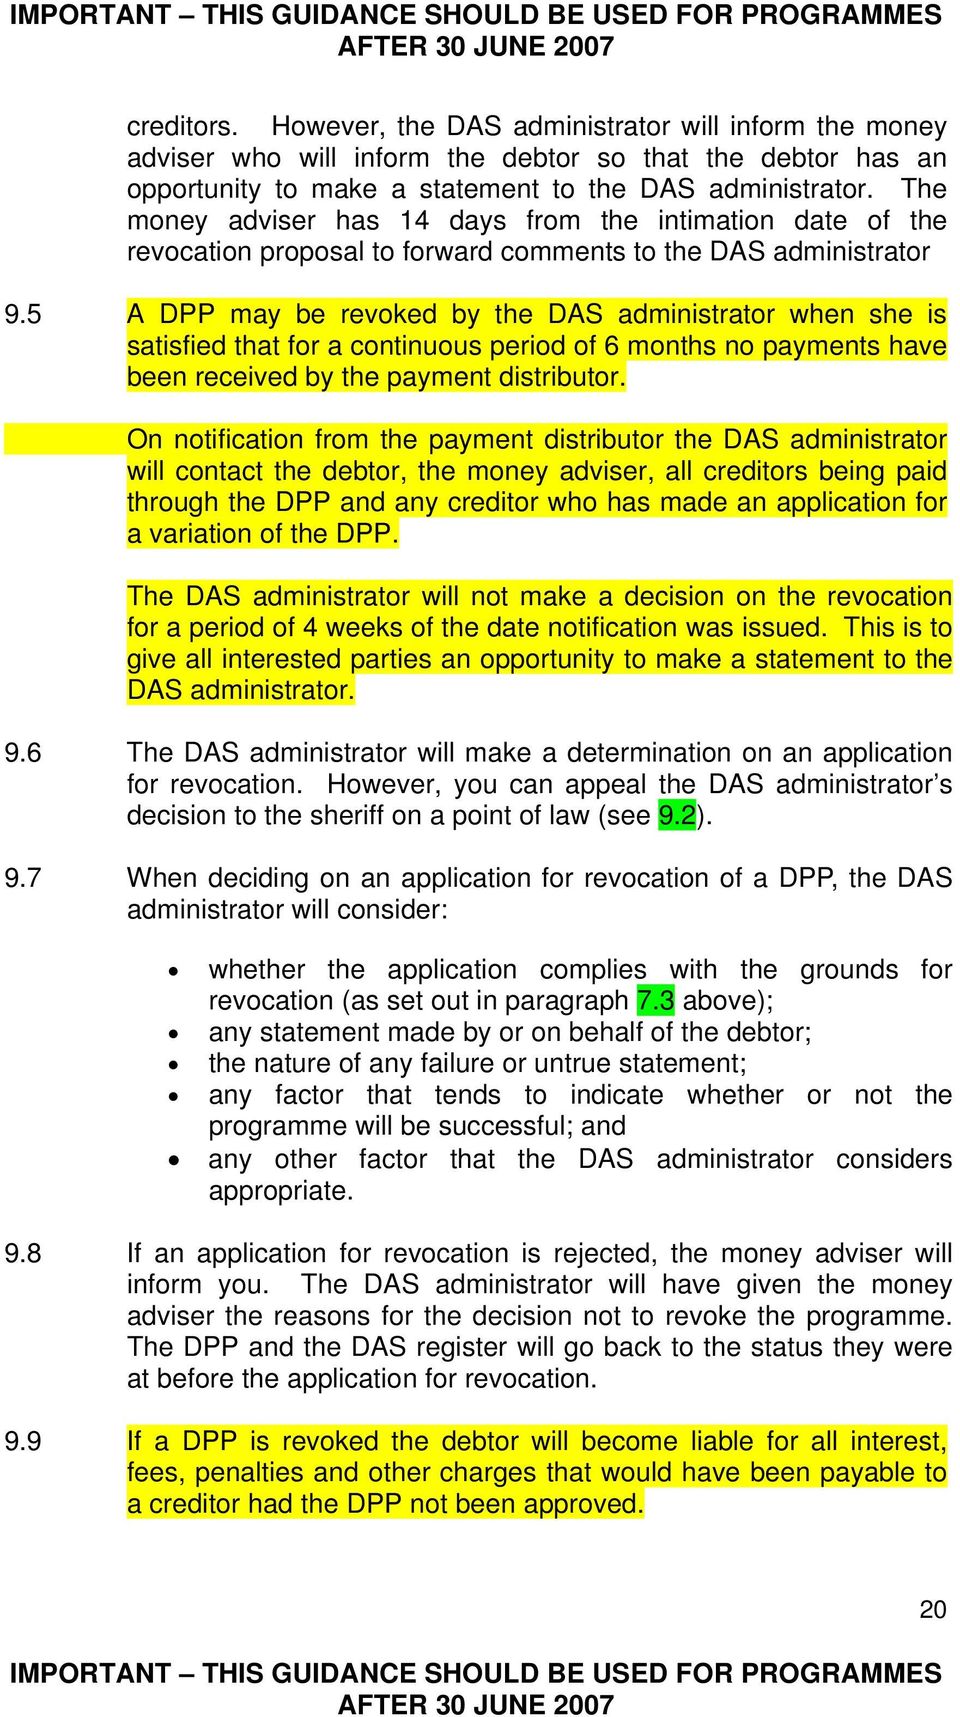 5 A DPP may be revoked by the DAS administrator when she is satisfied that for a continuous period of 6 months no payments have been received by the payment distributor.